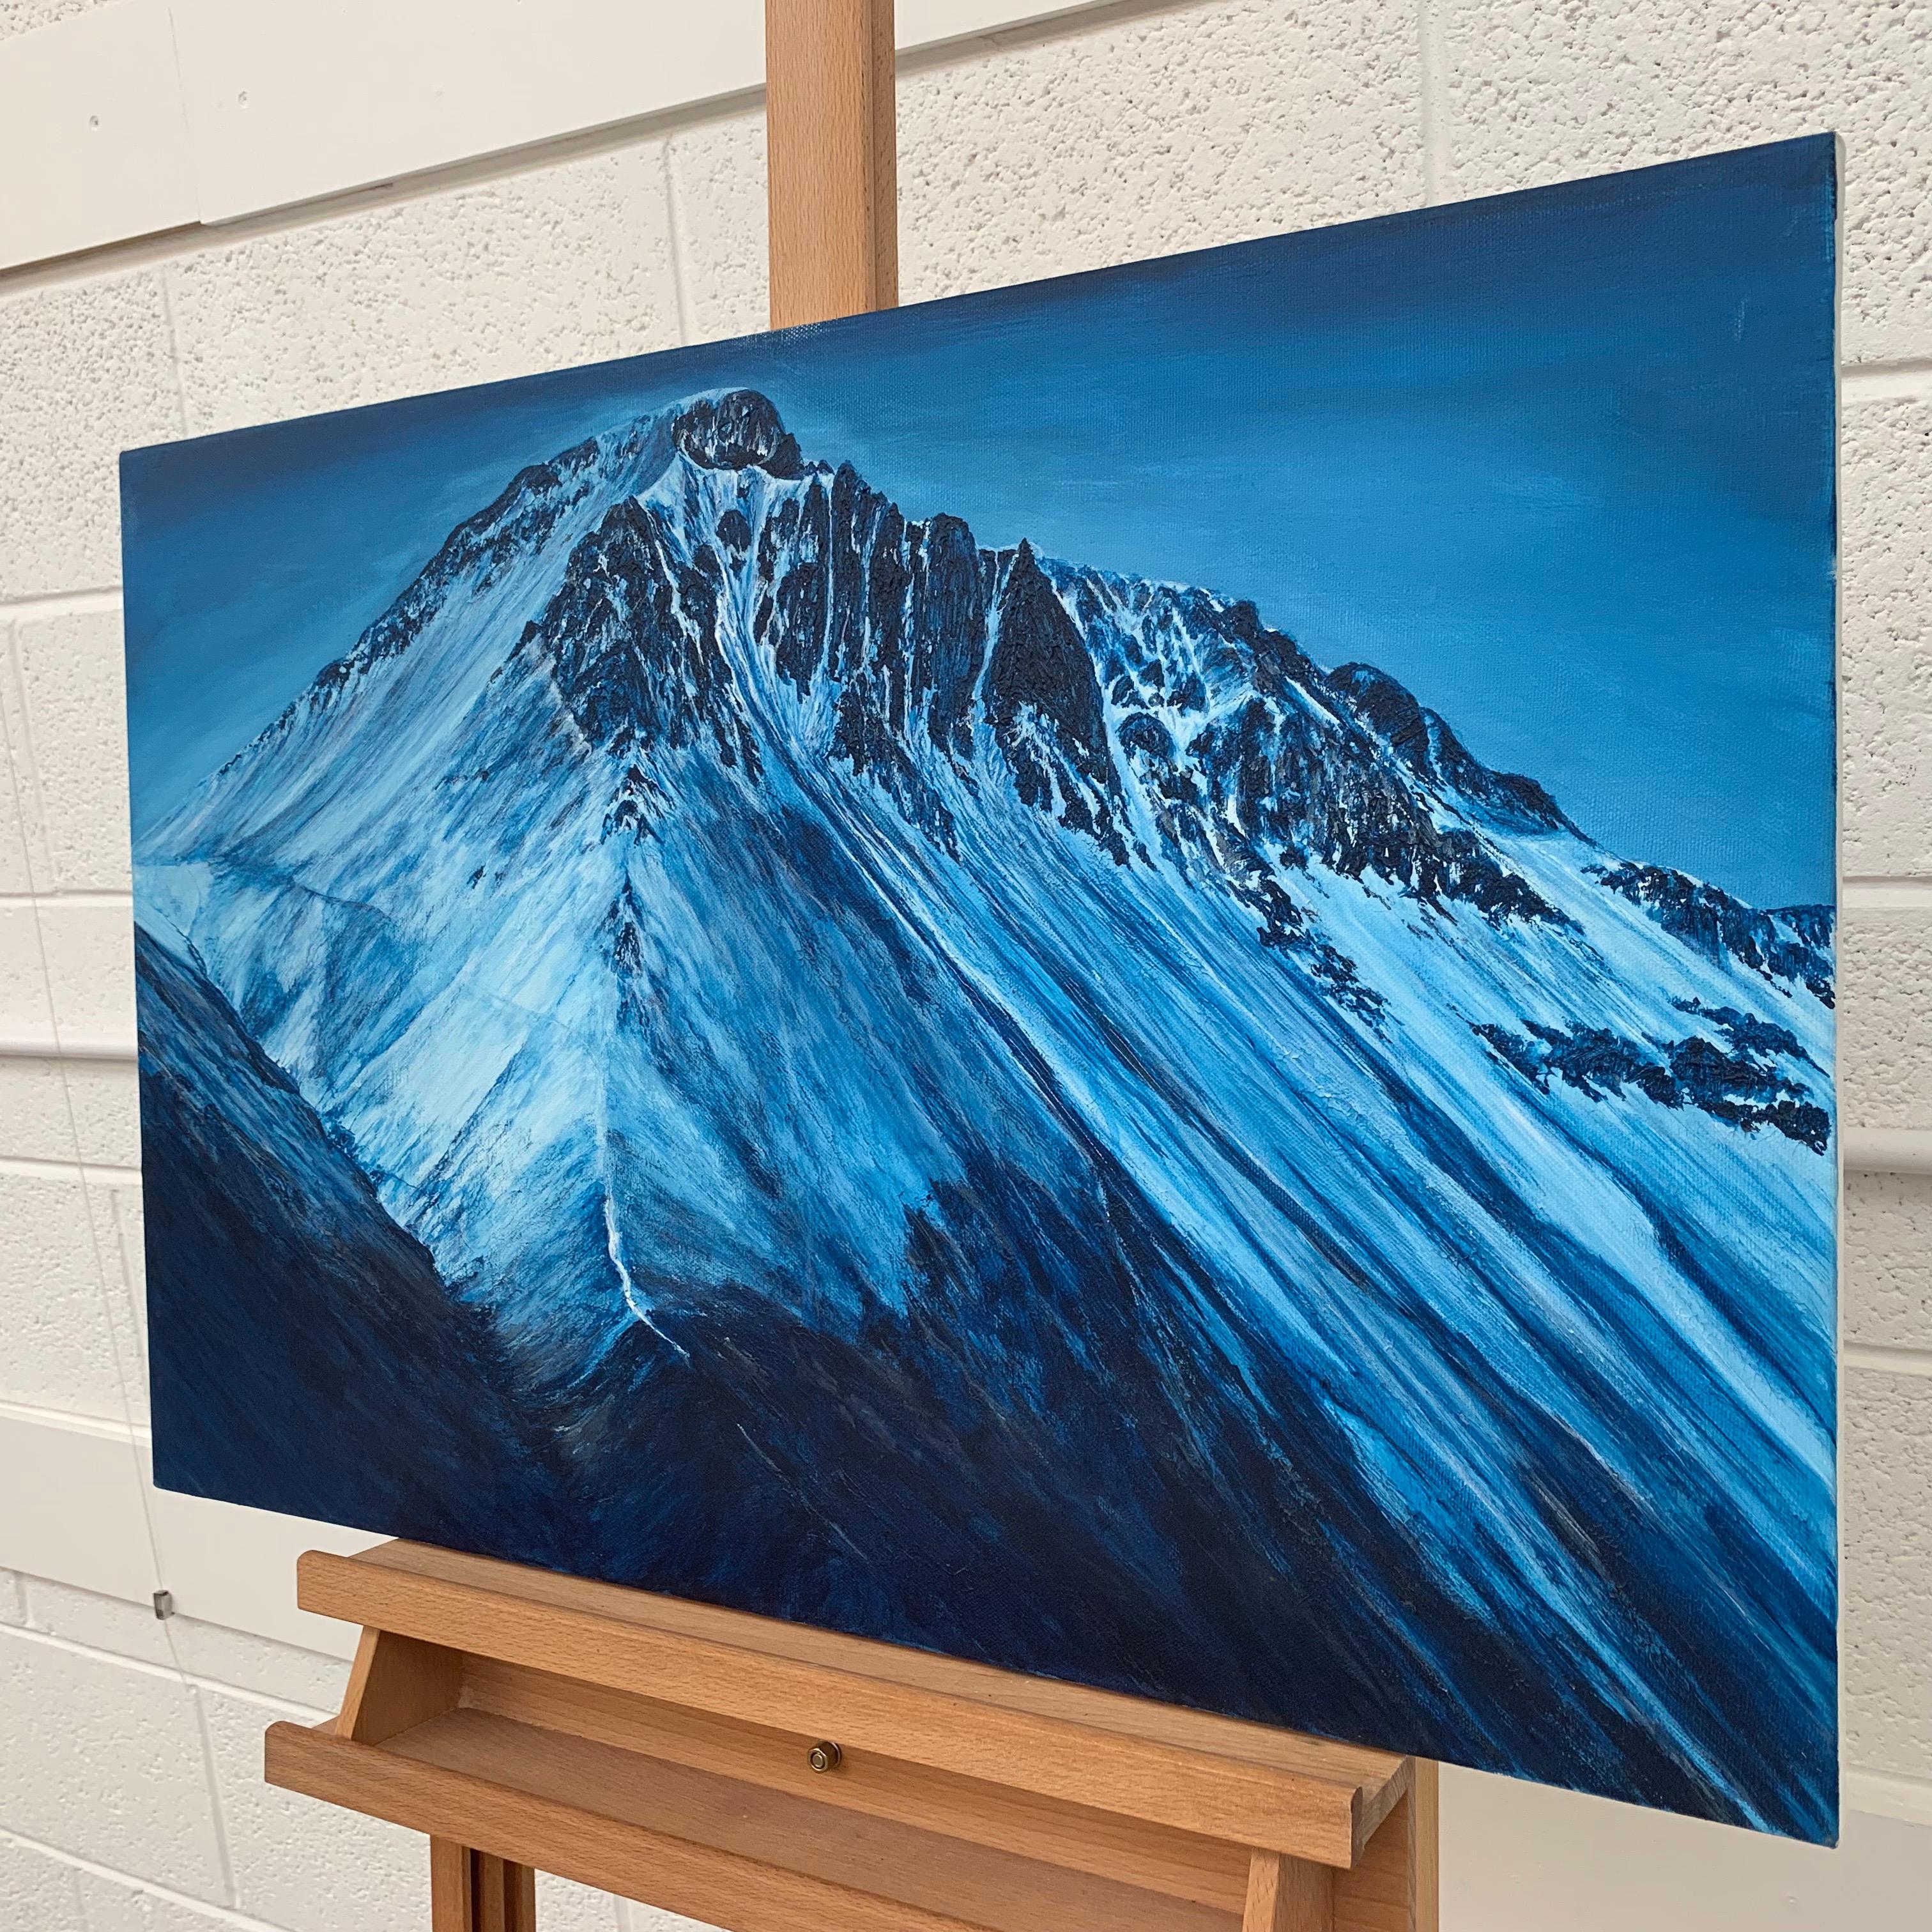 Blue Mountain Landscape Painting of Great Gable in the English Lake District by British Contemporary Artist Rebecca Ann Wilmer. Born in Lancashire in 1979, Rebecca went through her school-life painting and drawing landscapes. Gaining a BA (Hons) in